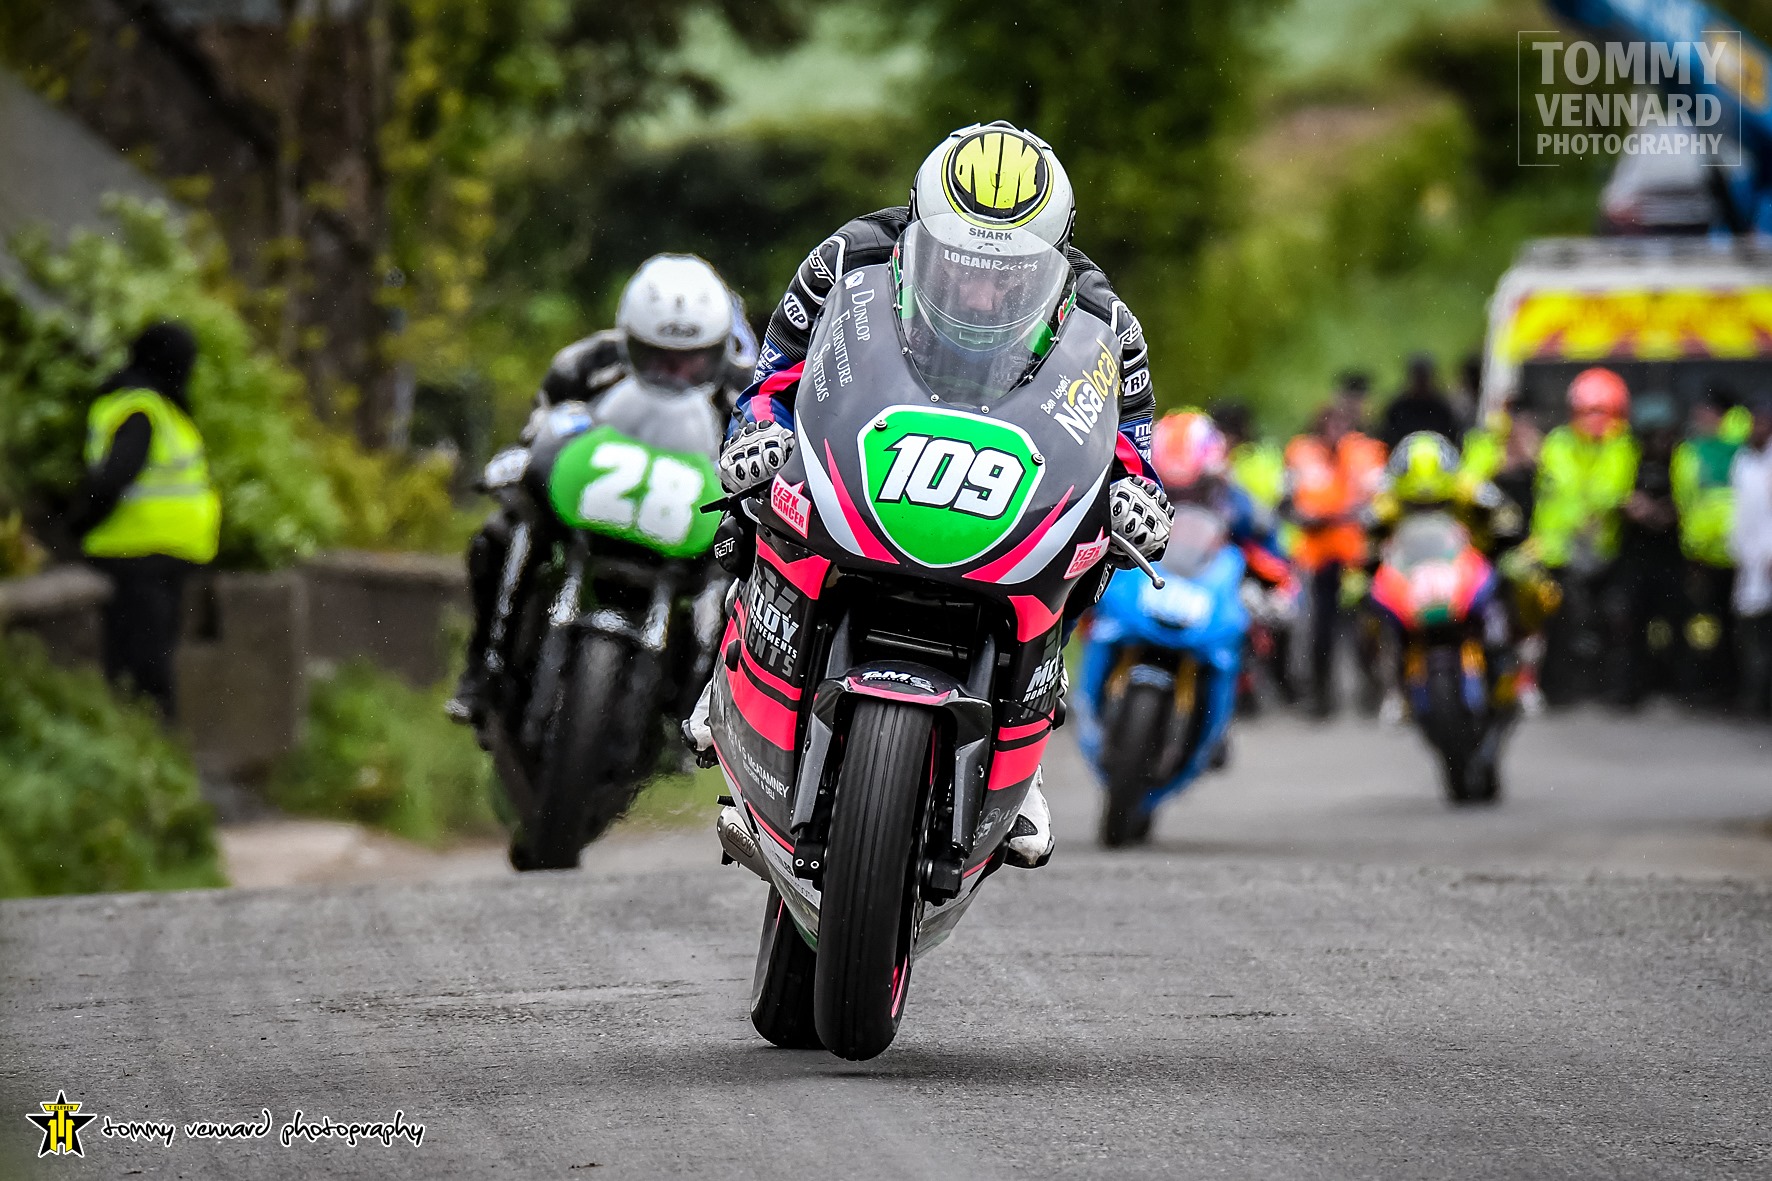 Cookstown Preview Series Part 2 – Super Twin/Lightweight Races